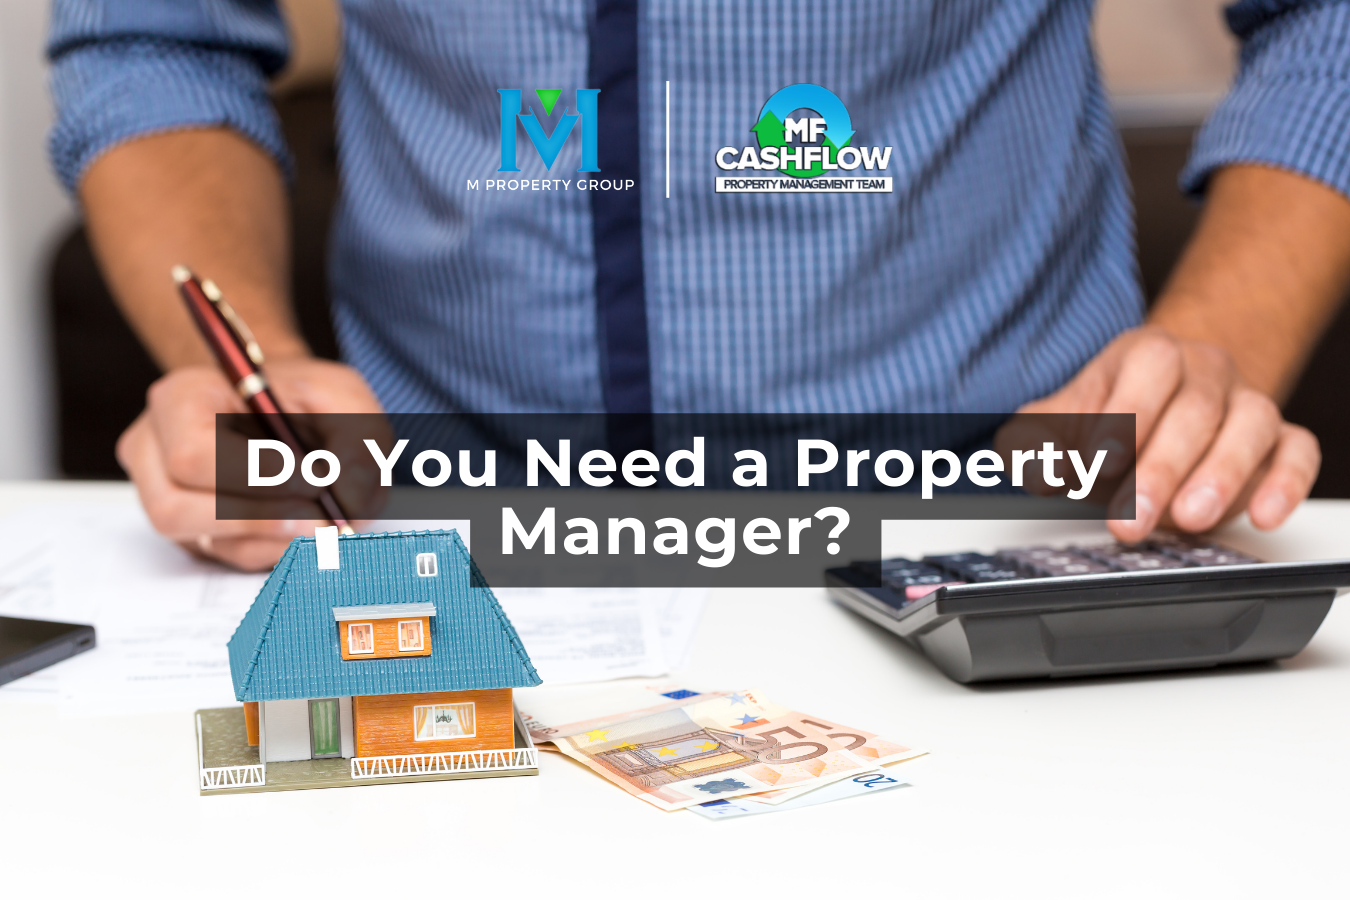 Do You Need a Property Manager?